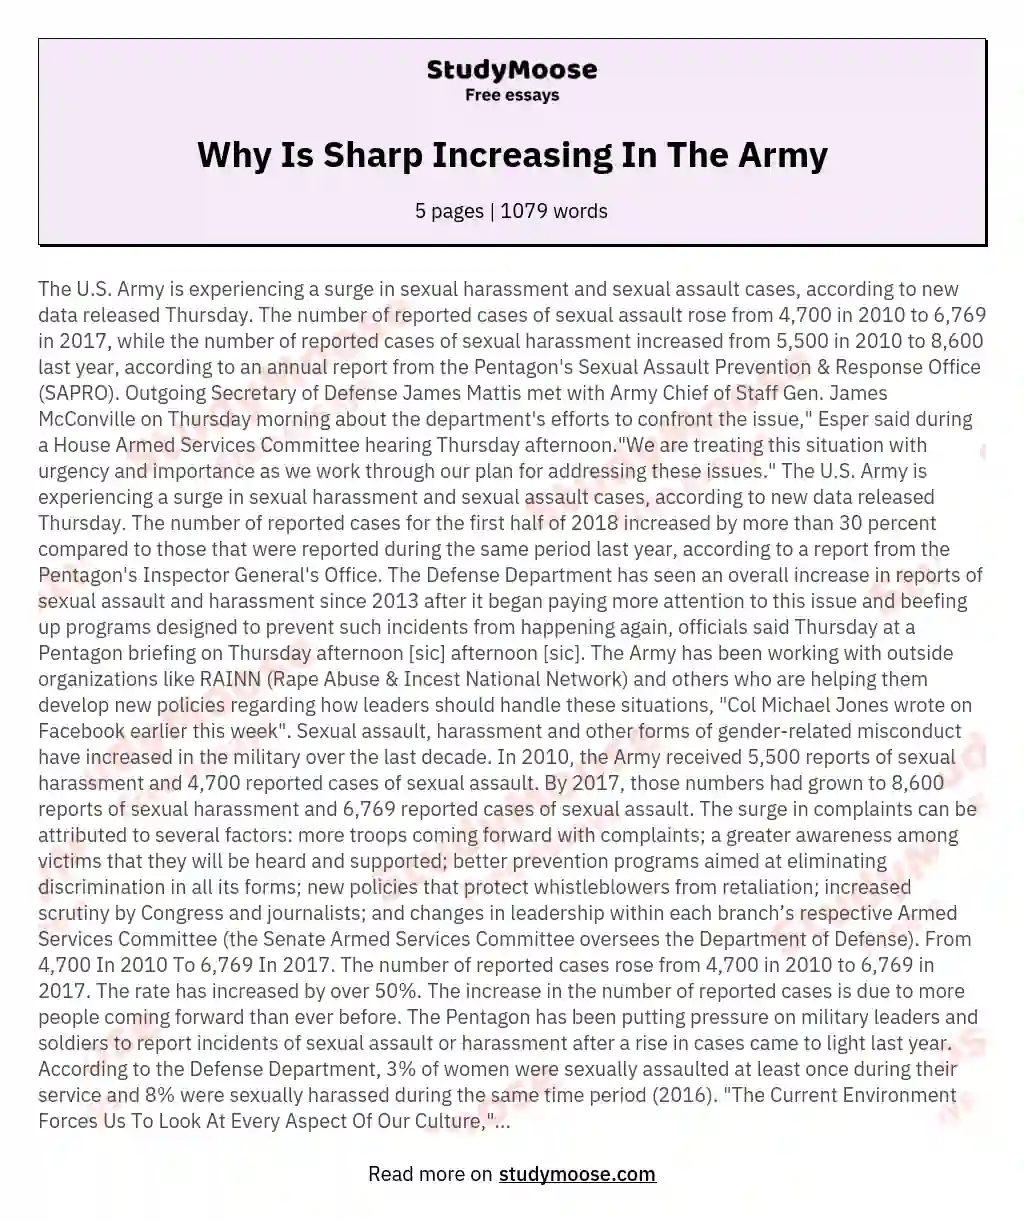 Why Is Sharp Increasing In The Army essay